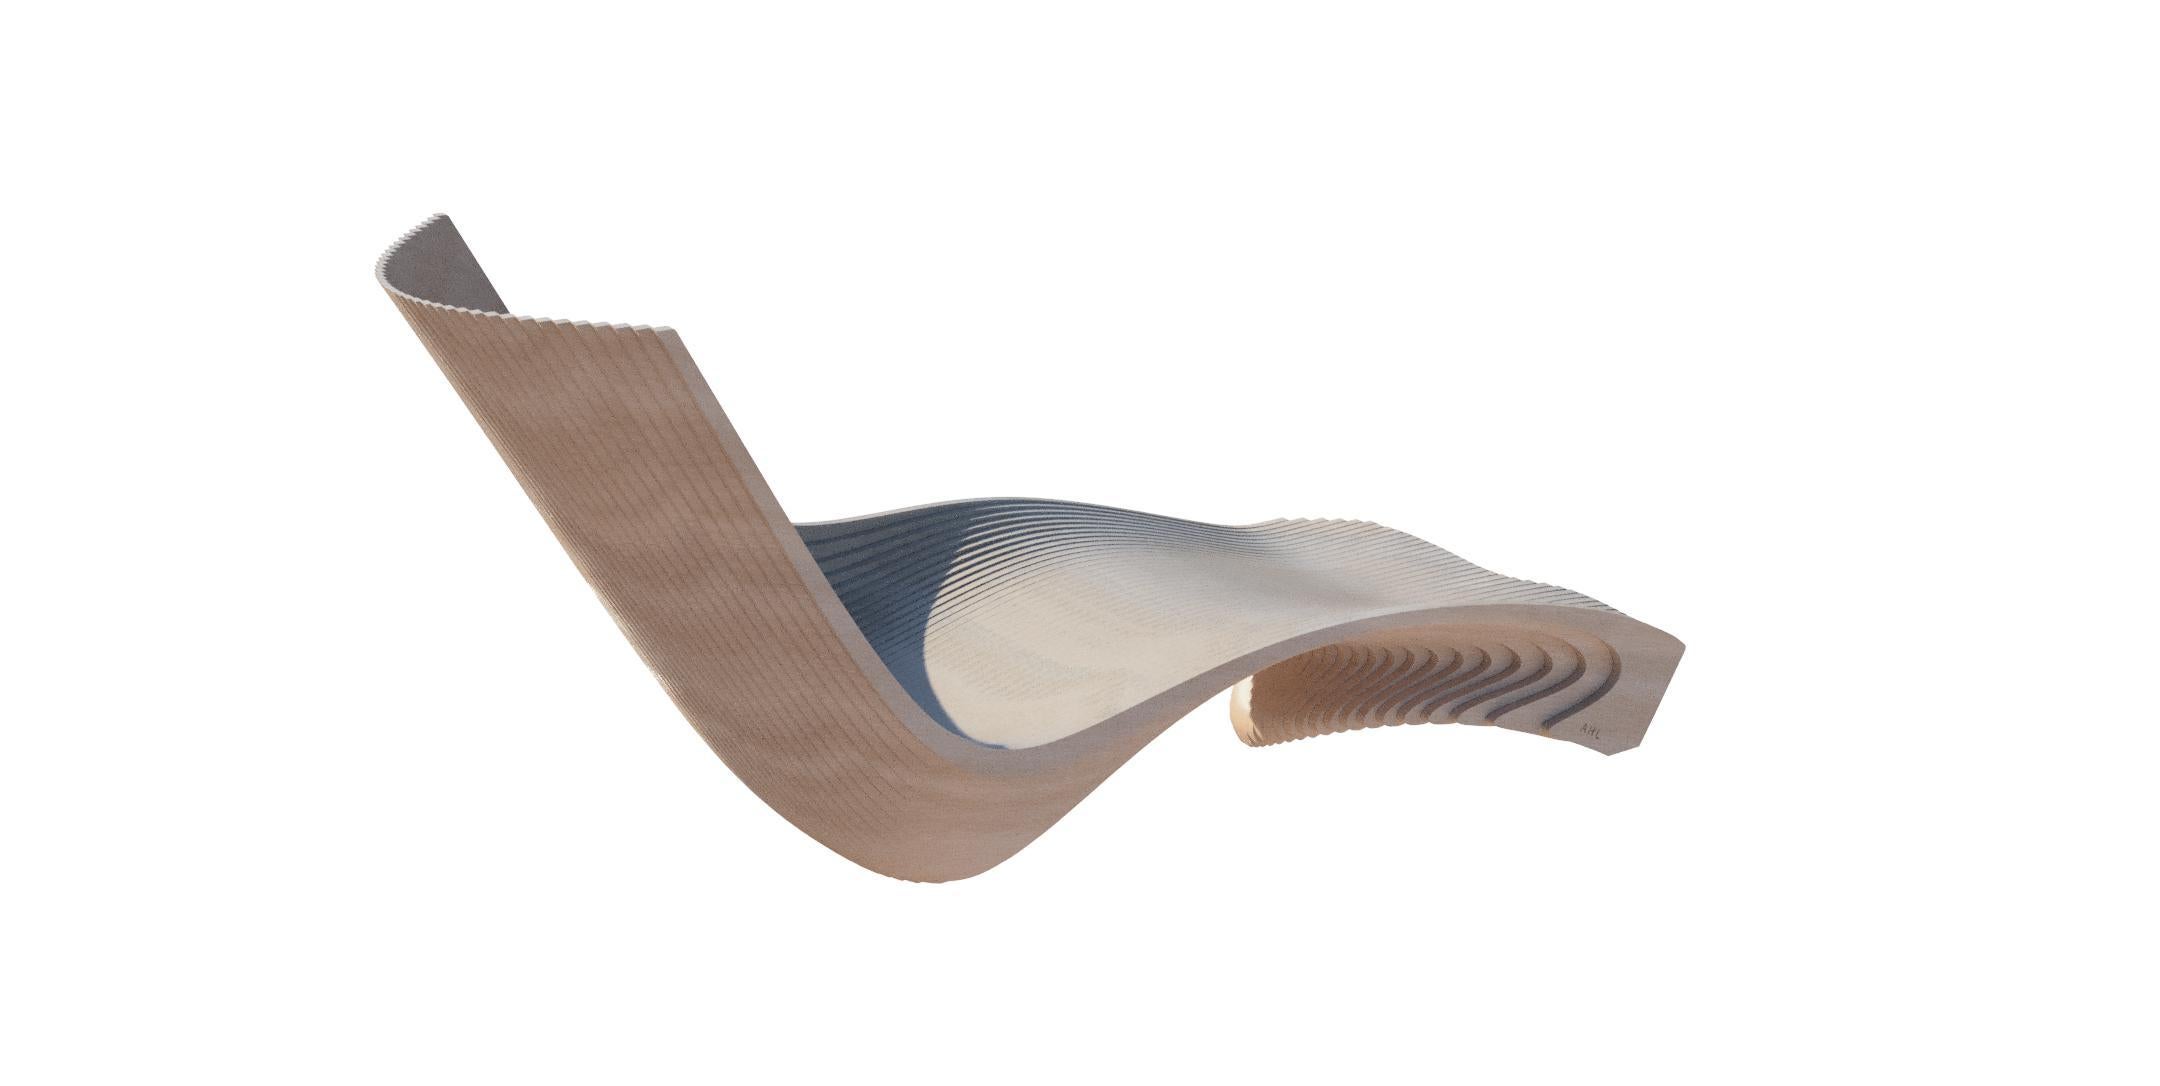 Wooden lounger a sculptural piece inspired by the shape of a mermaid, very comfortable and prepared for indoor and outdoor use, made of wood with a marine resin coating that waterproofs the wood and makes it highly resistant to the